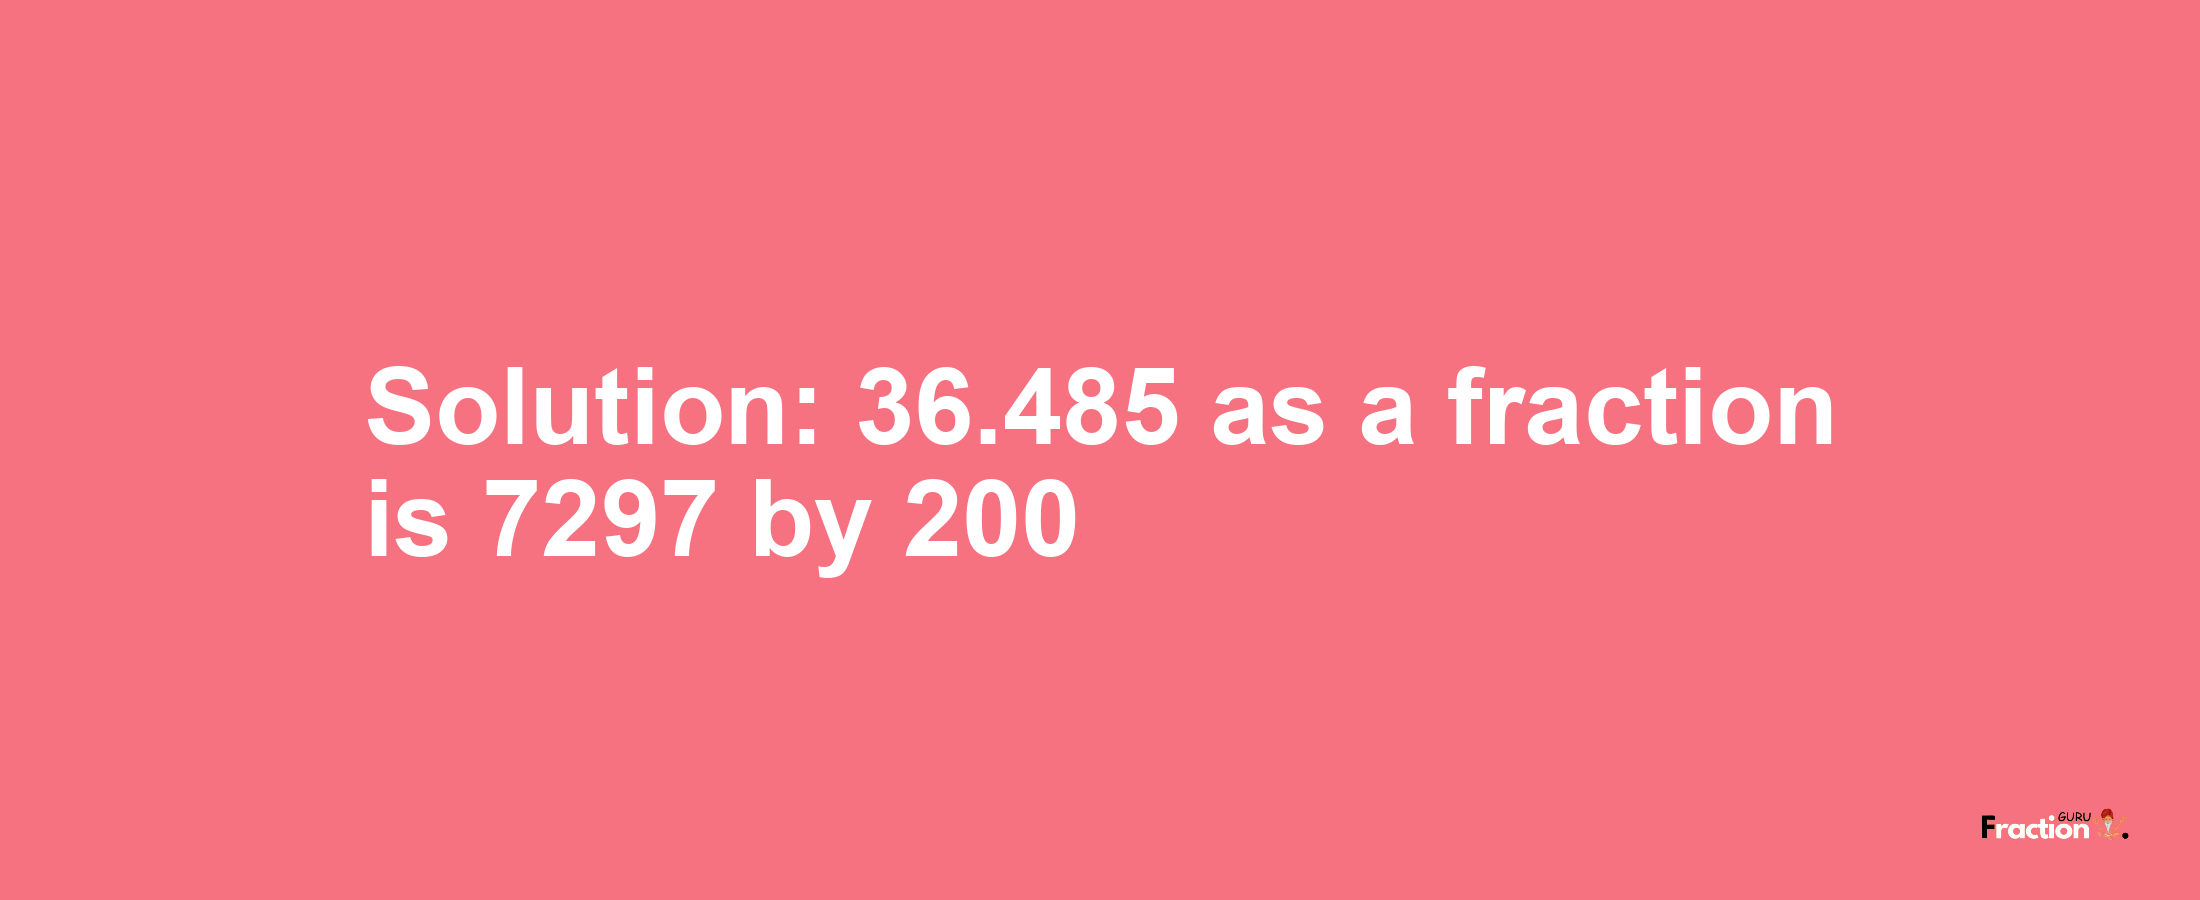 Solution:36.485 as a fraction is 7297/200